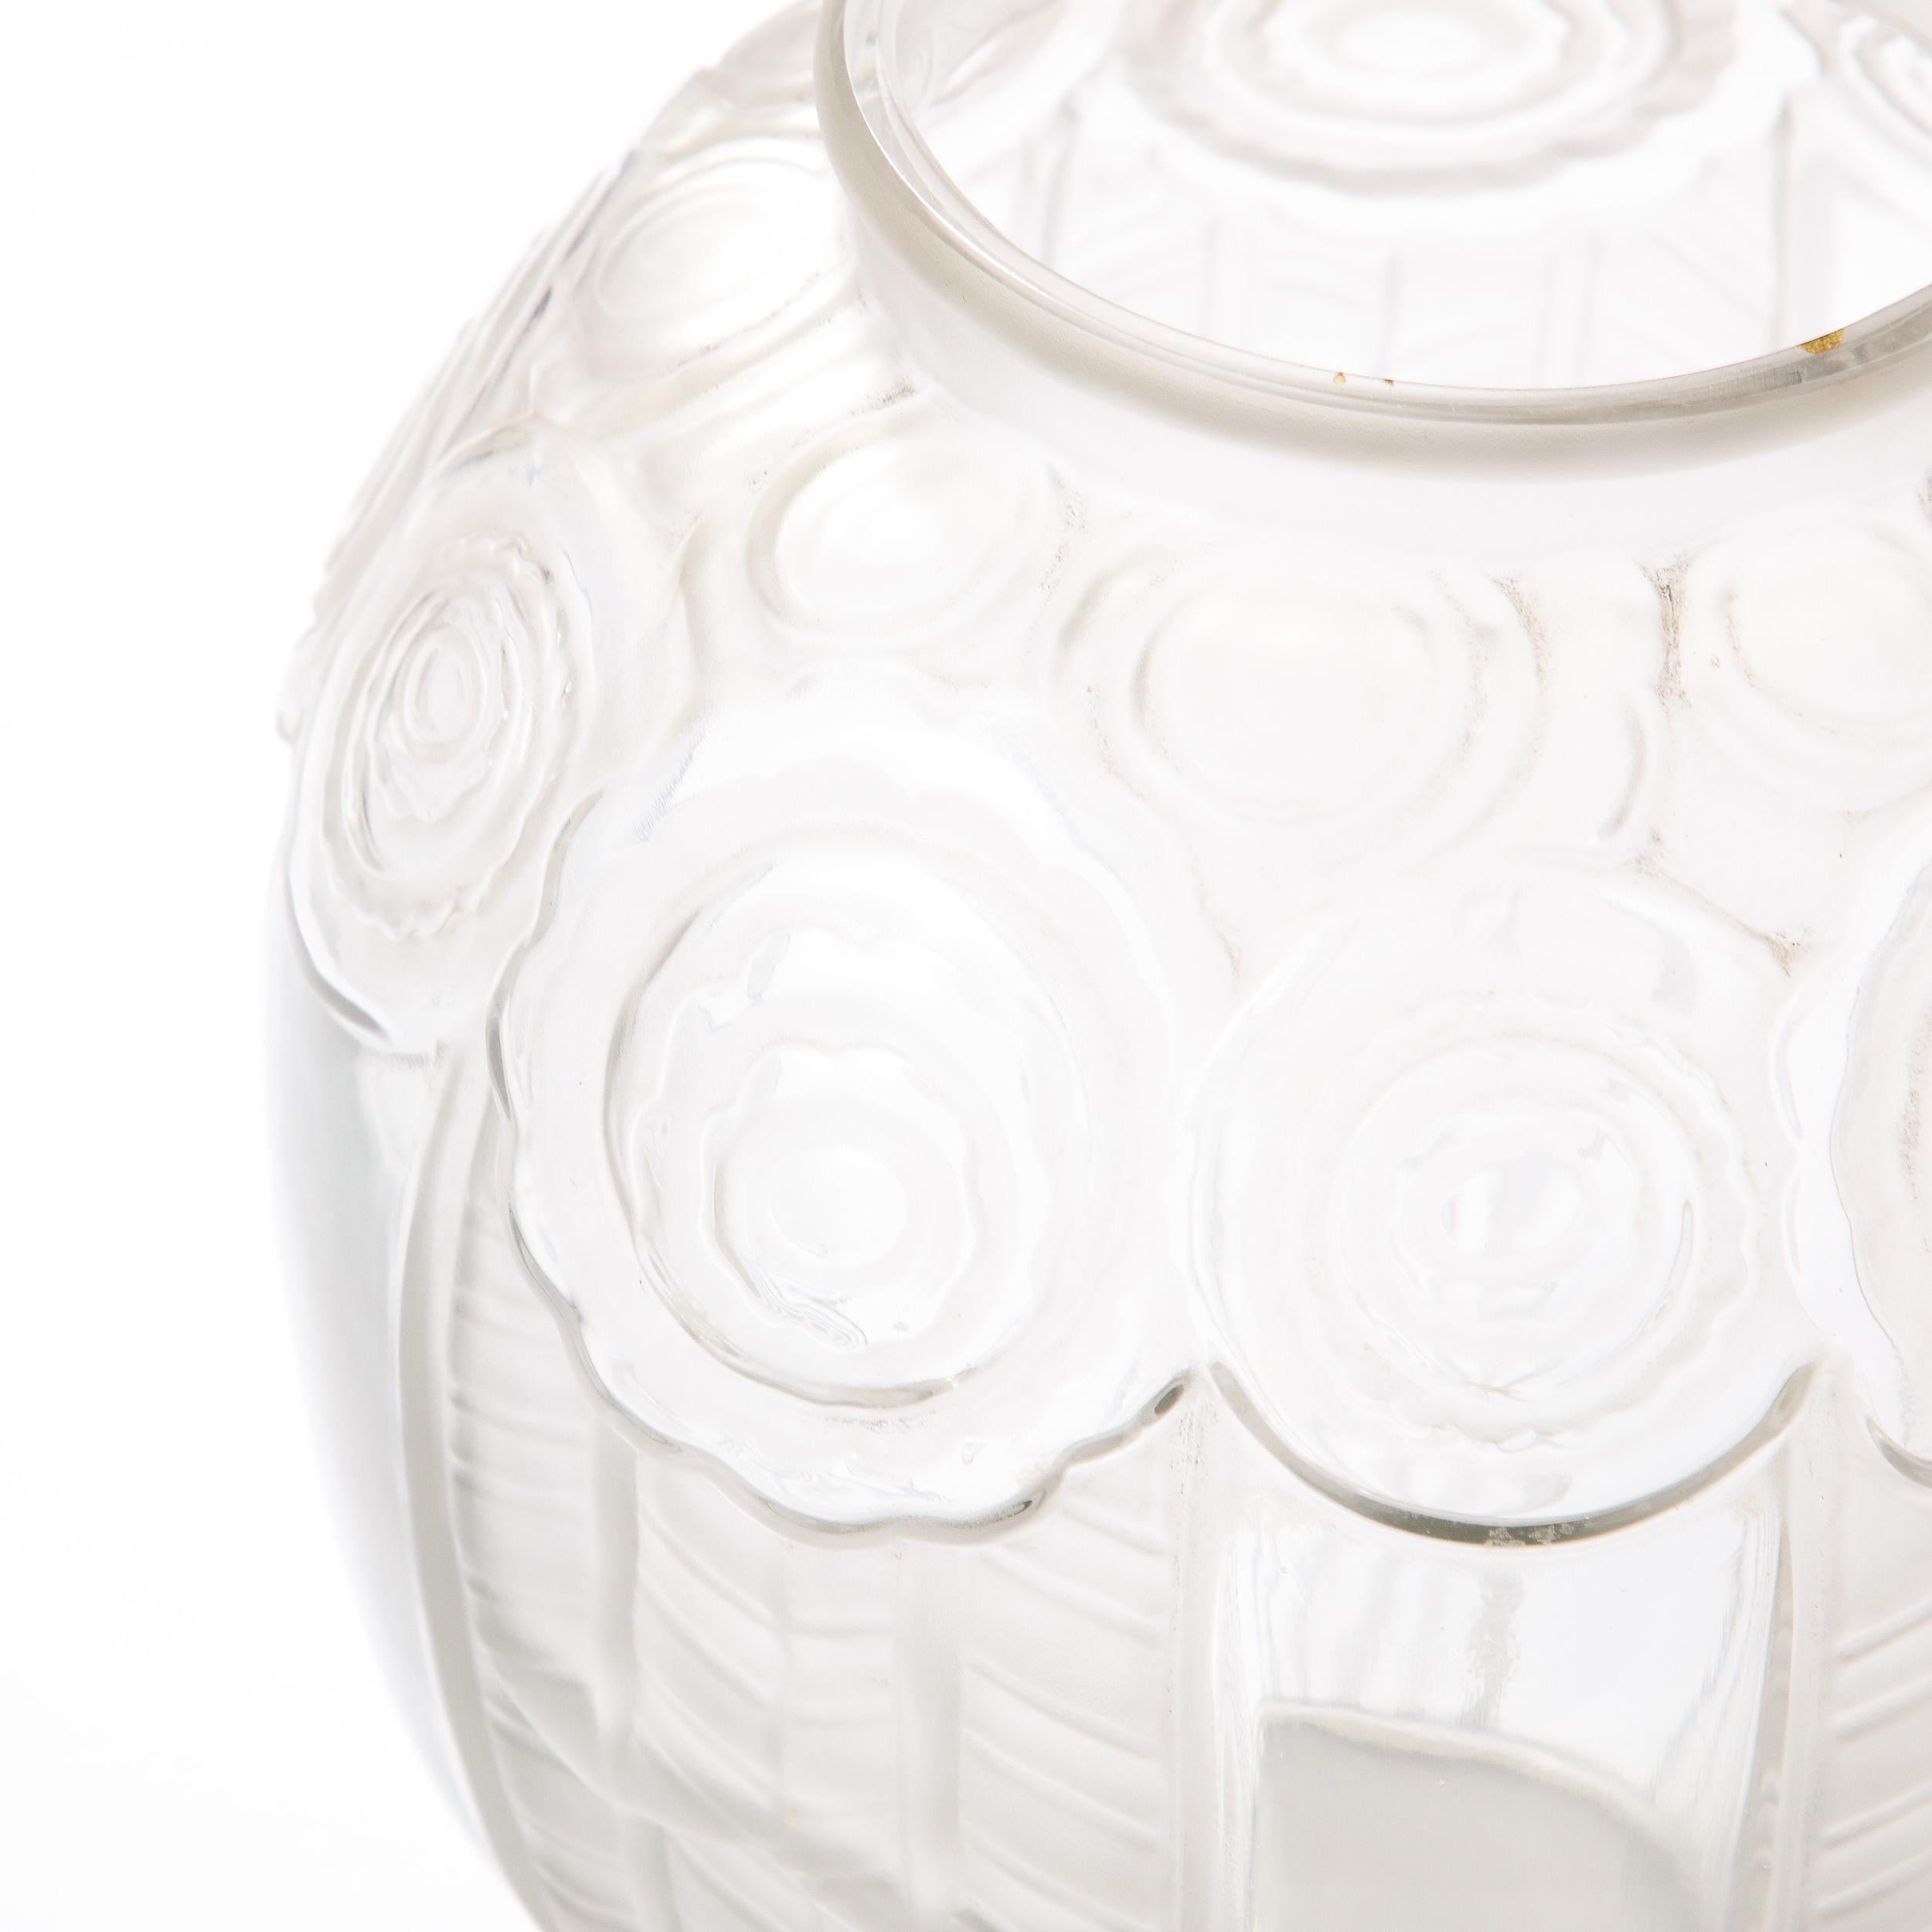 Mid-20th Century Art Deco Cubist Translucent Glass Vase with Rose Detailing by Andre Hunebelle